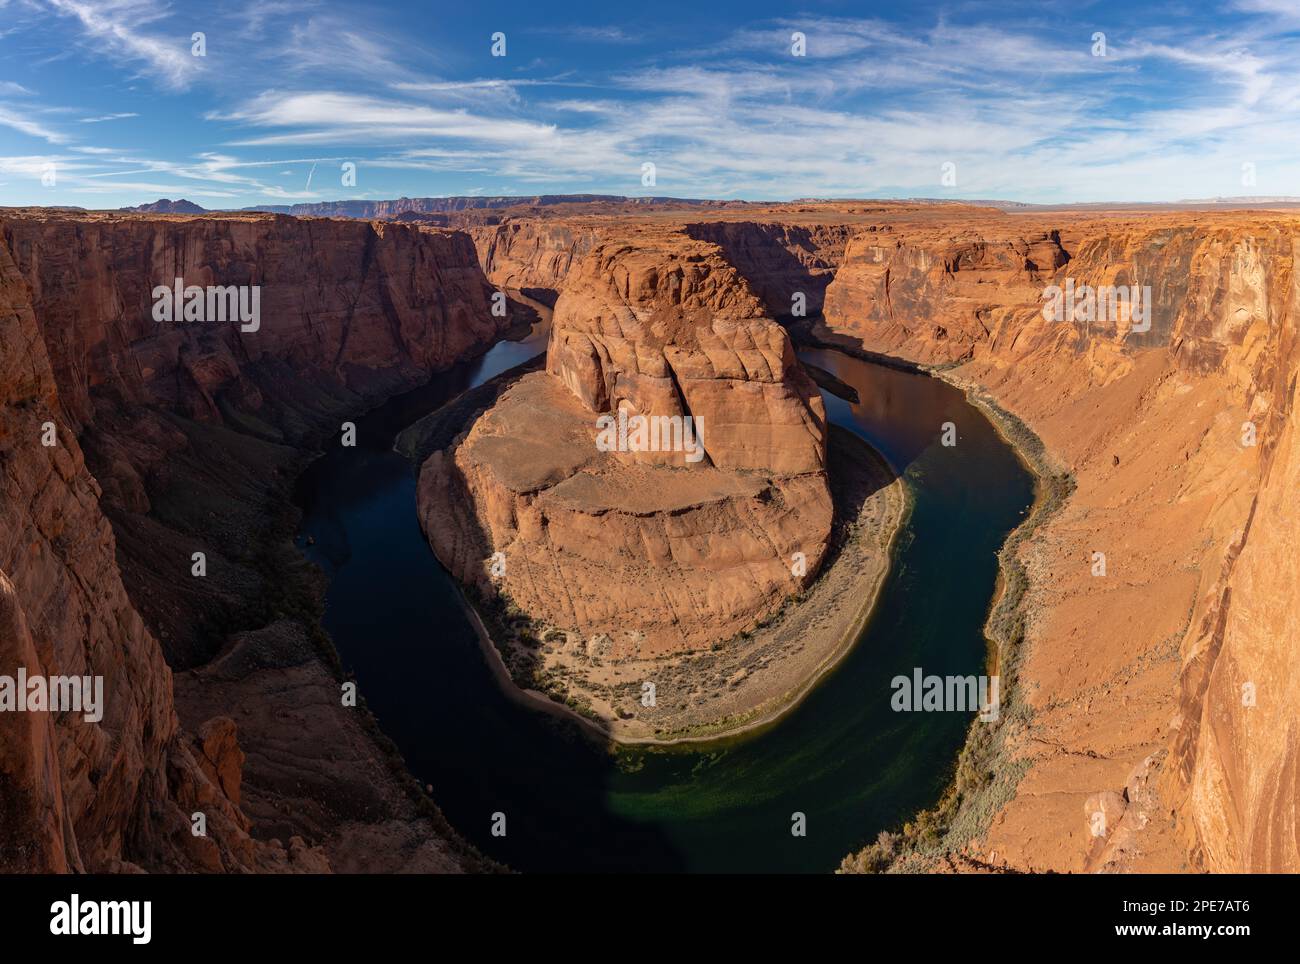 A picture of the Colorado River and the Grand Canyon landscape on the Horseshoe Bend. Stock Photo